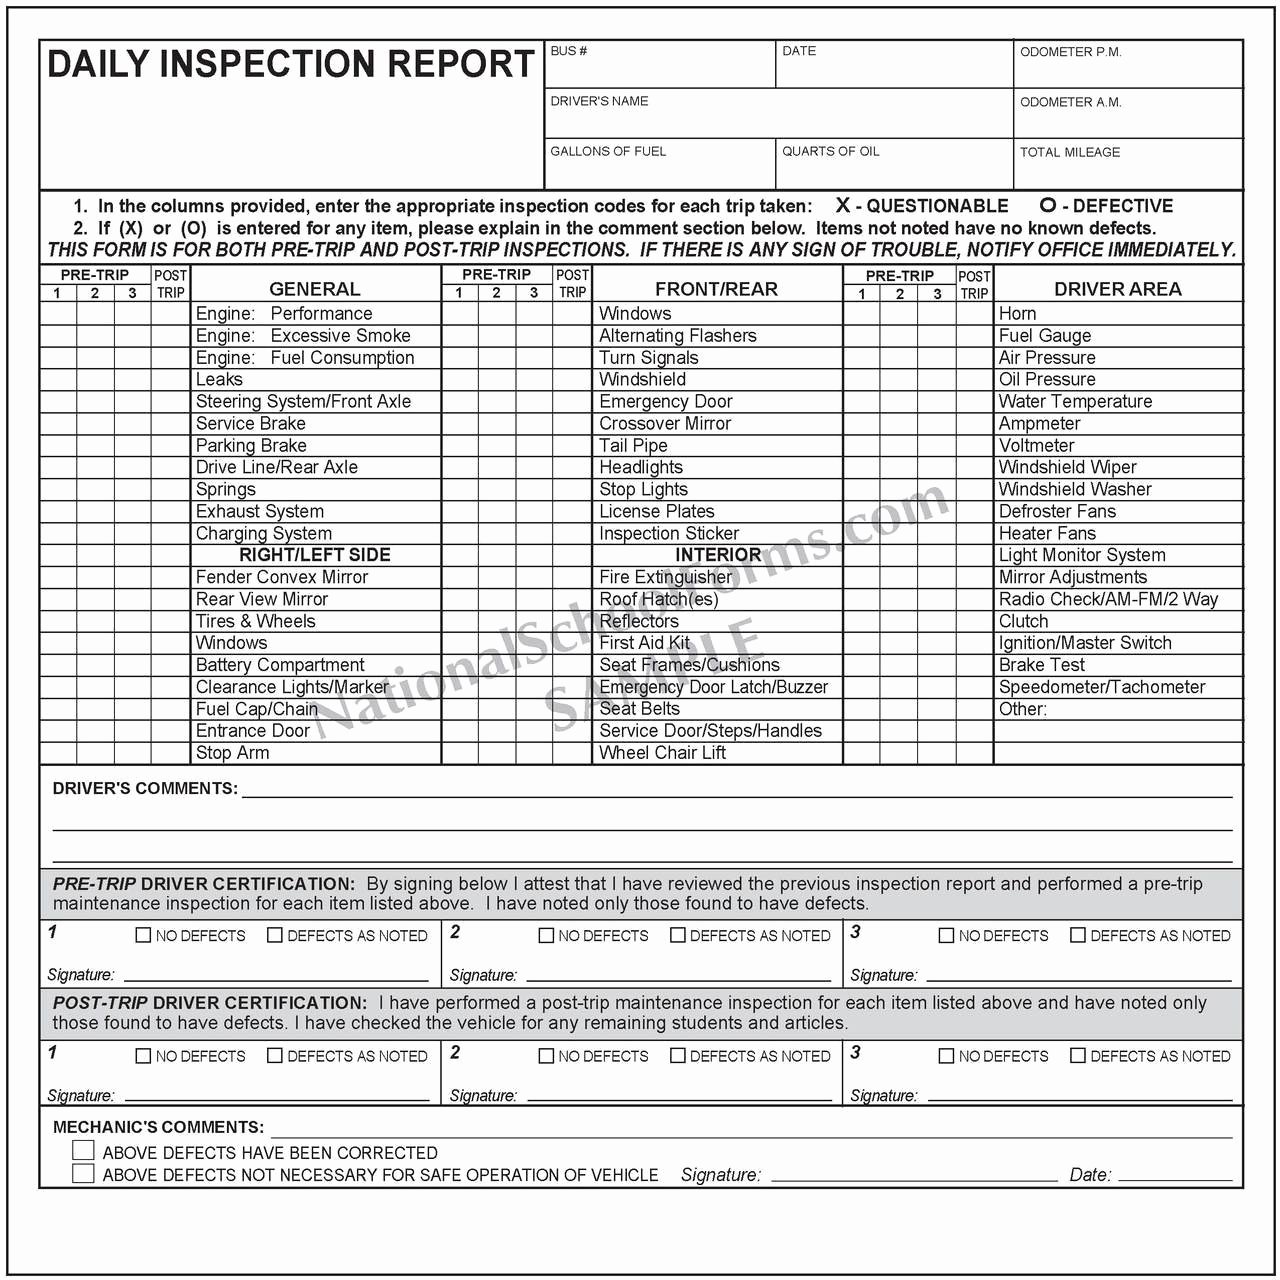 Daily Vehicle Inspection Report Template New Daily Inspection Report Booklet with Pre and Post Trip Nationalschoolforms